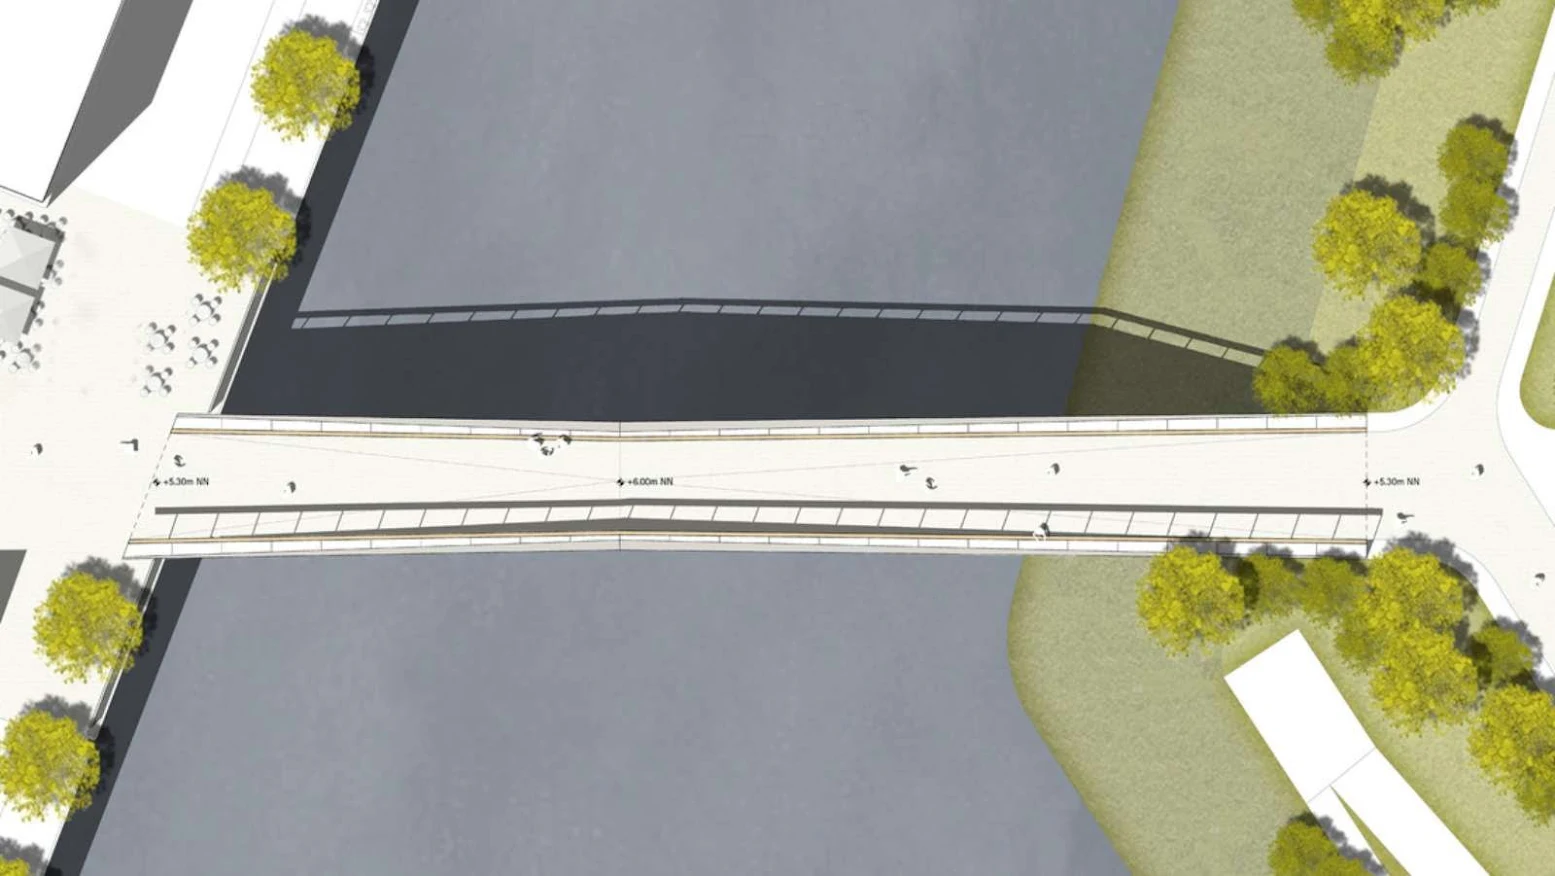 Gmp Wins the Pedestrian and Cycle Bridge Competition